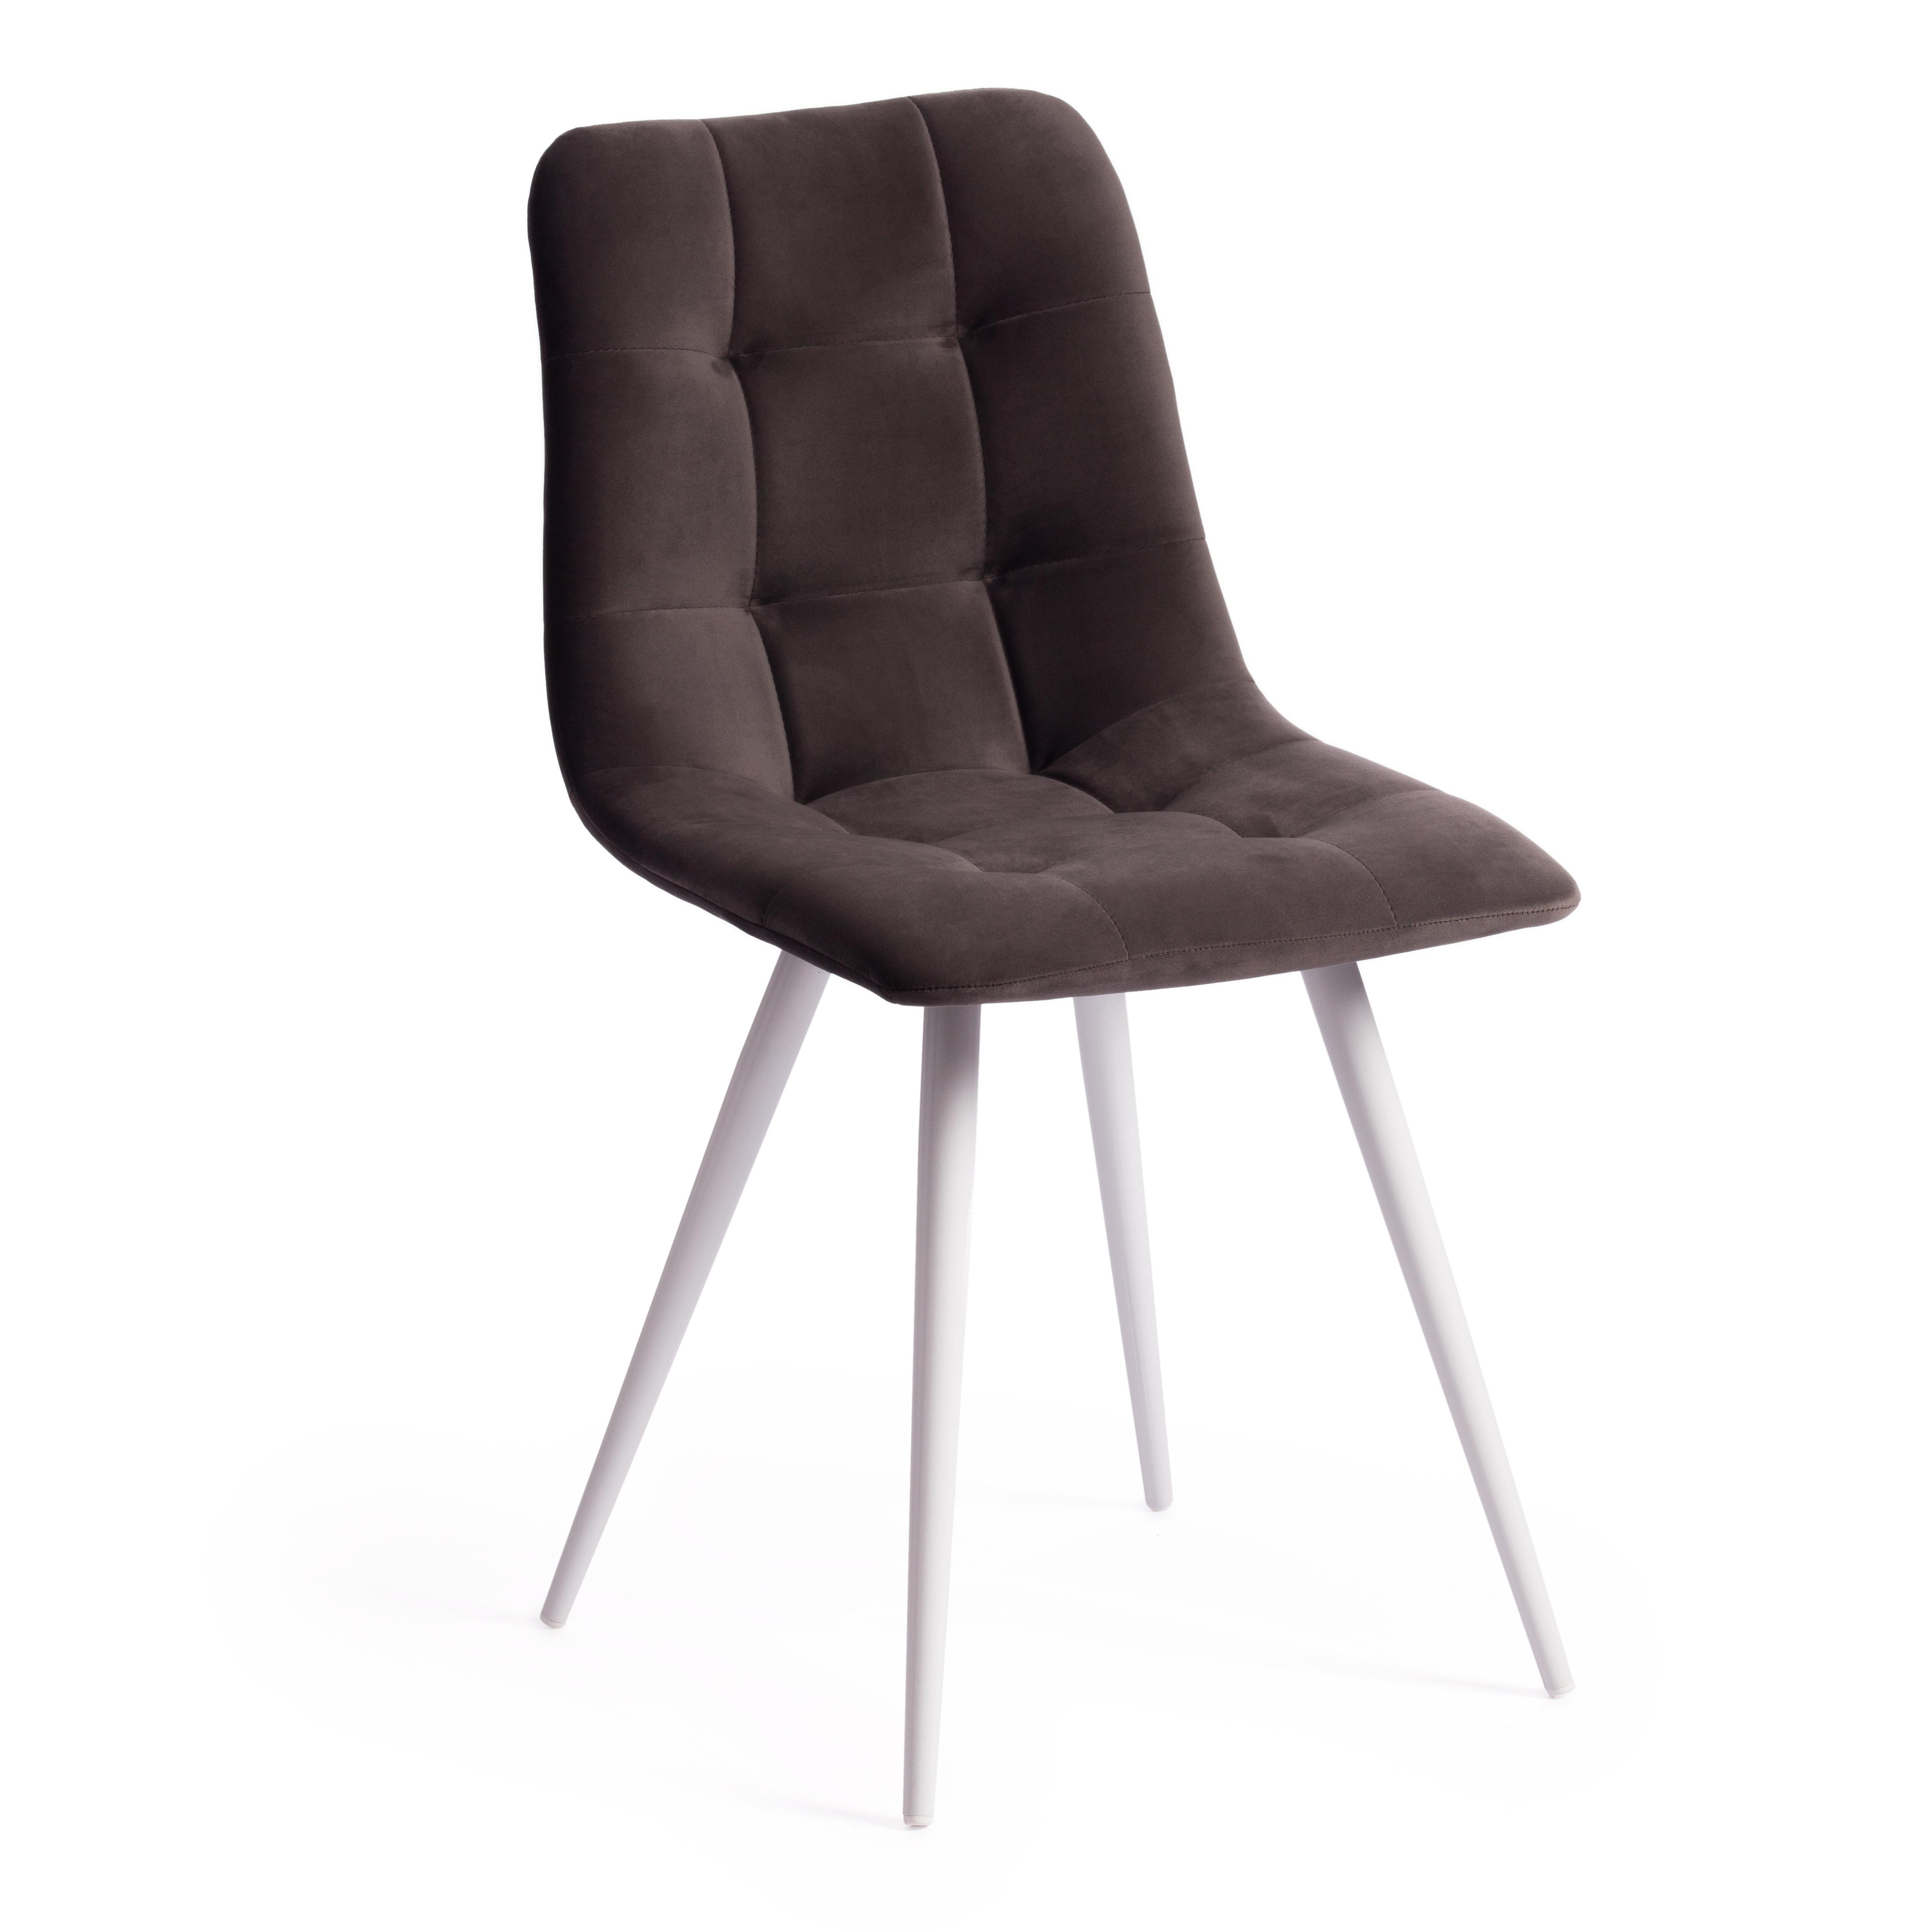  TetChair Chilly 7095-1 -, -  14,  